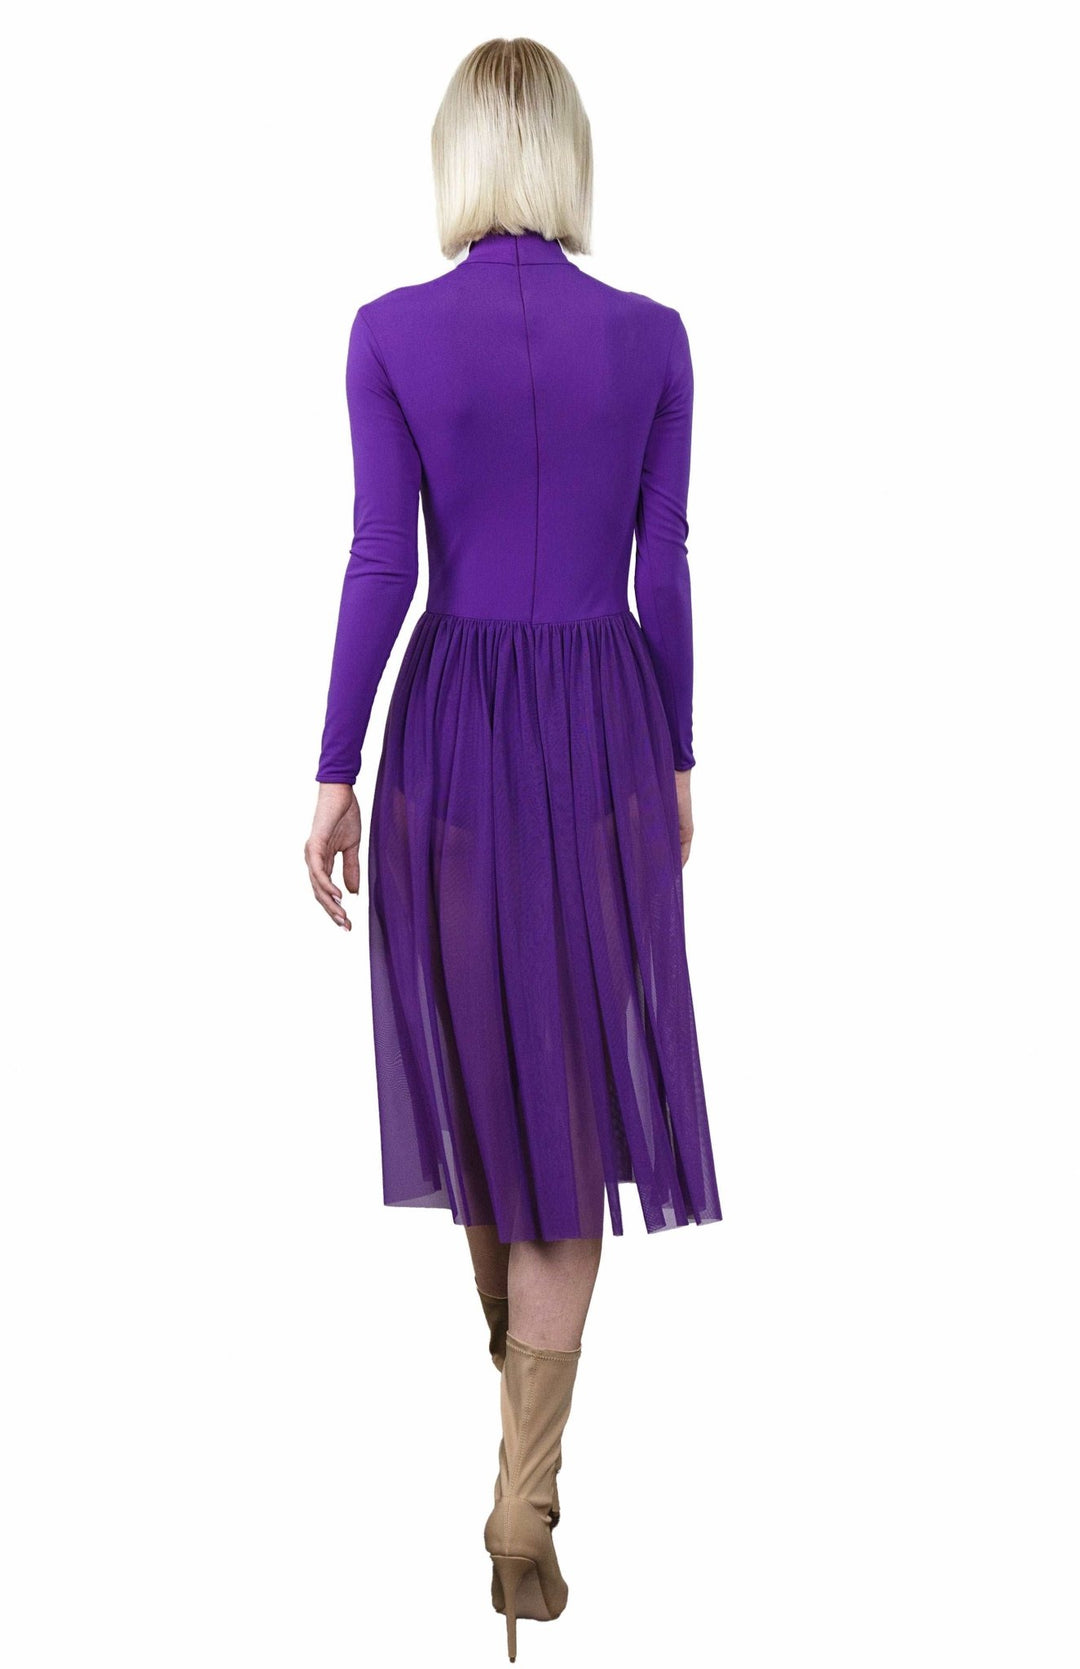 Chic, purple, ballerina style, bodysuit dress, with long sleeves, turtleneck and gathered sheer skirt below the knee.